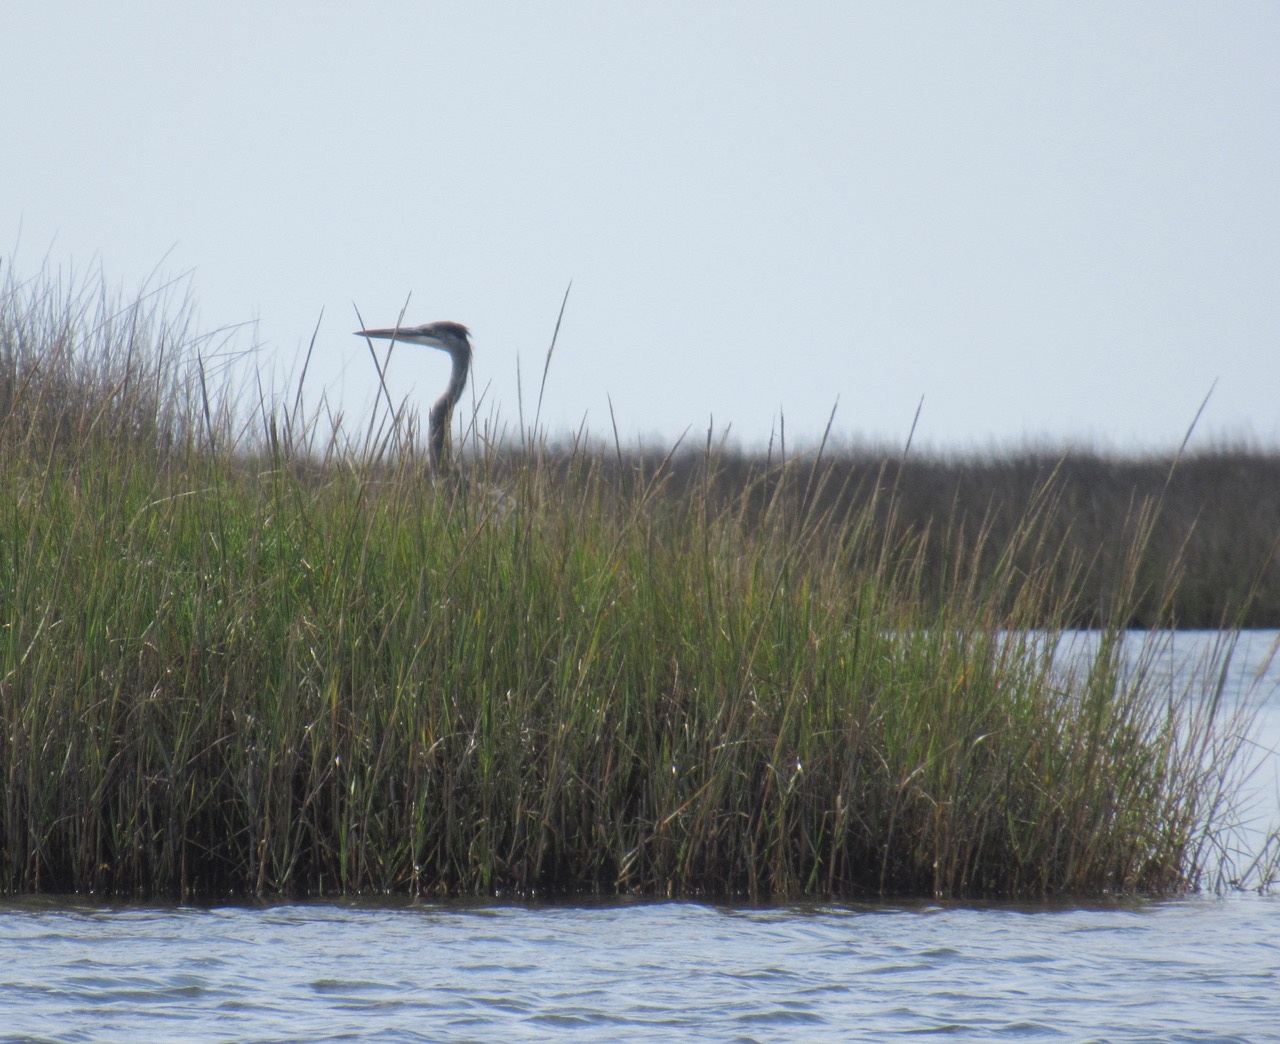 Outer Banks Pea Is. heron